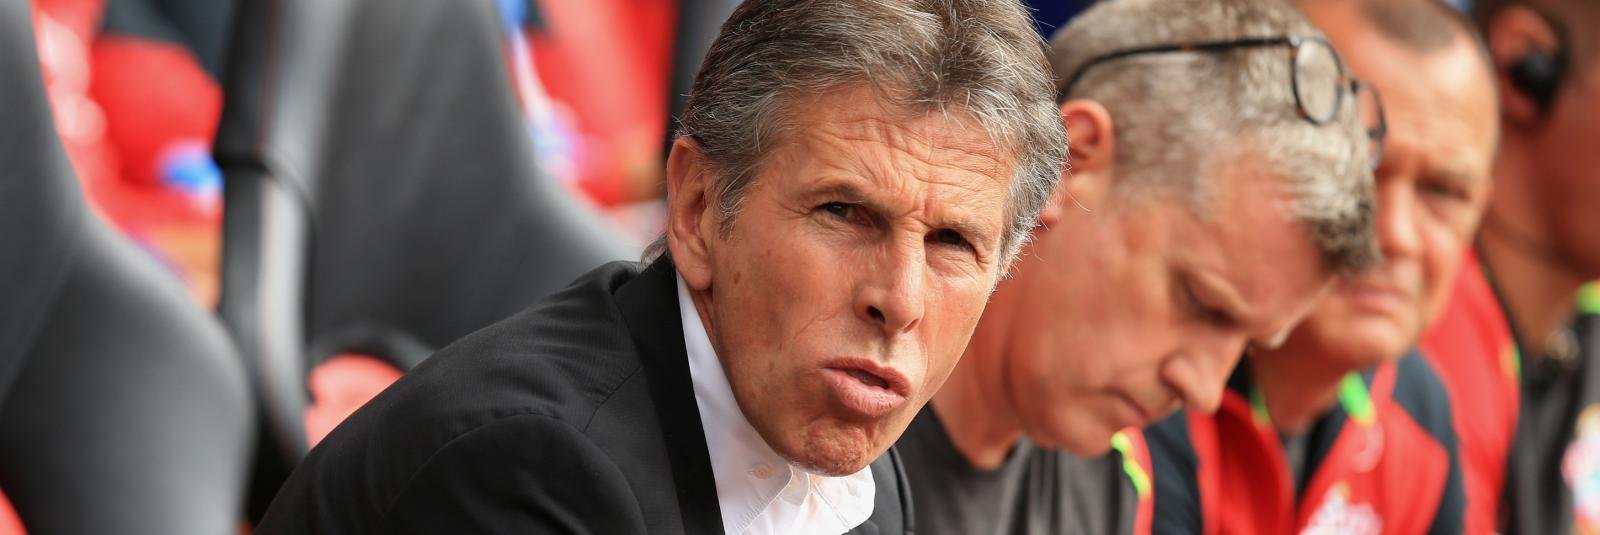 Southampton’s Claude Puel risks a rocky winter if results don’t pick up soon